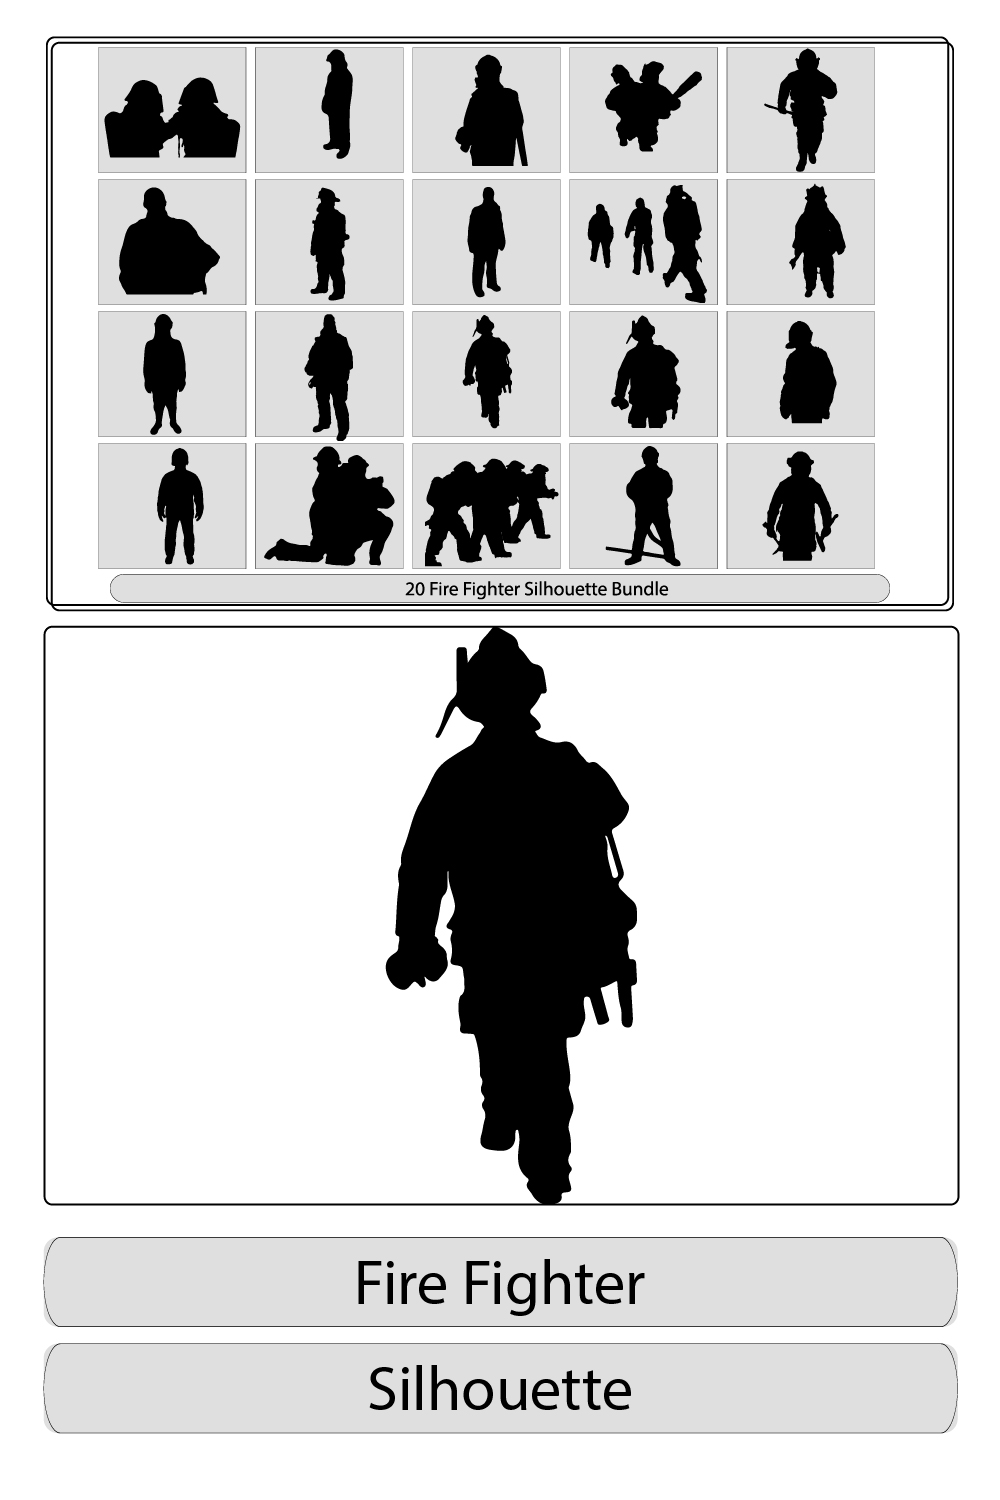 Firefighter Silhouette,silhouette of a fireman with a fire hose,Firefighter with equipment silhouette,Set of silhouette firefighters pinterest preview image.